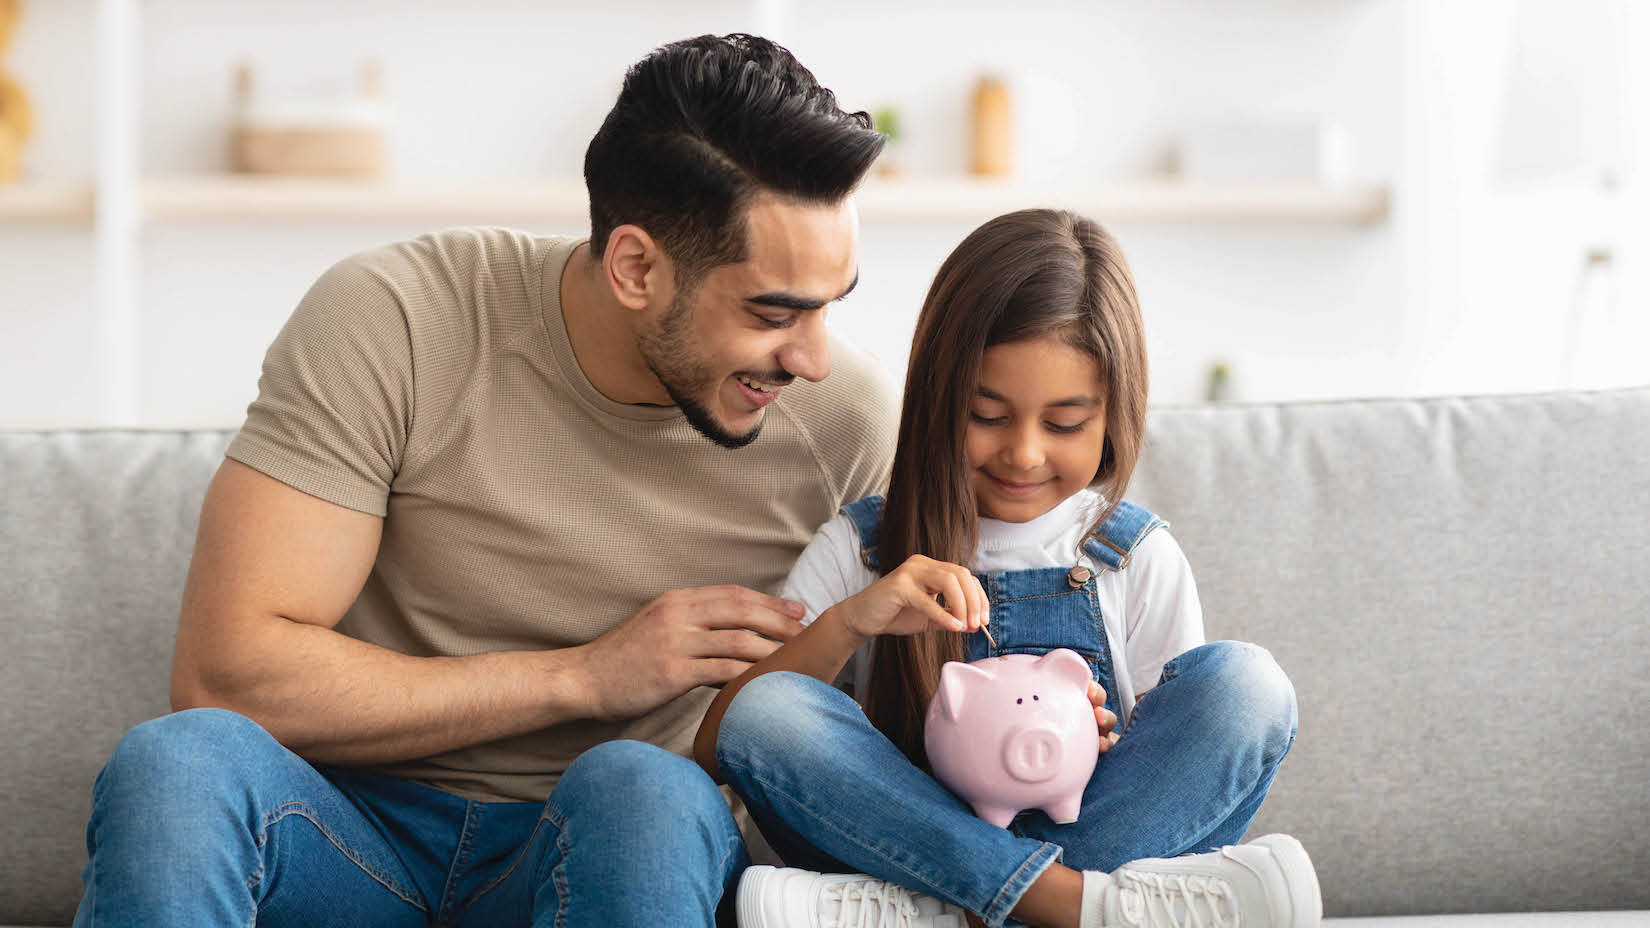 Daughter & Father With Piggy Bank